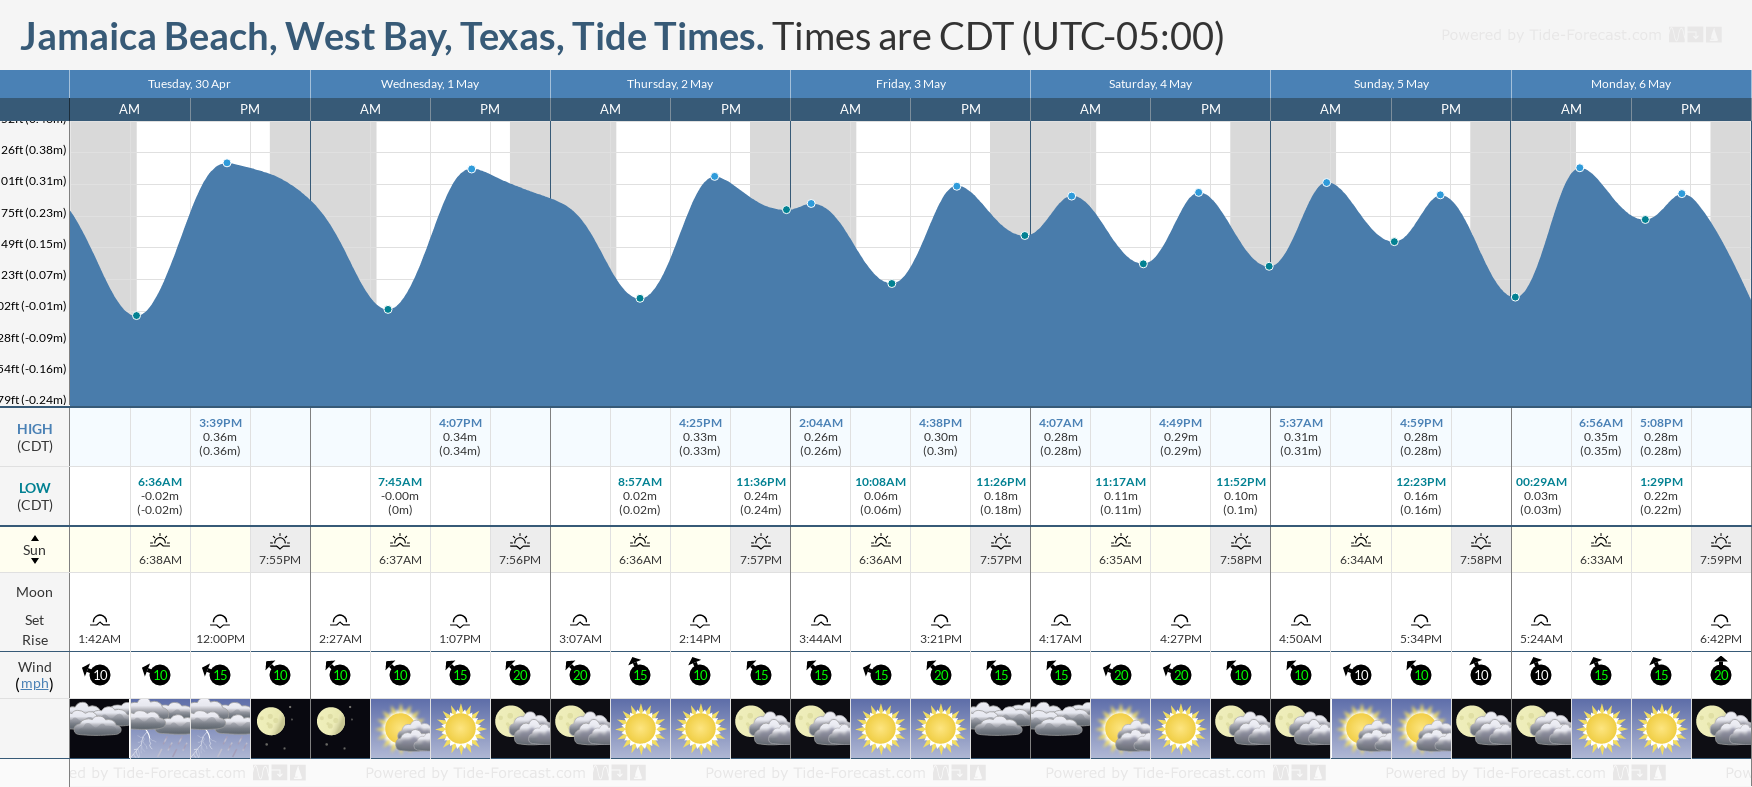 Jamaica Beach, West Bay, Texas Tide Chart including high and low tide tide times for the next 7 days